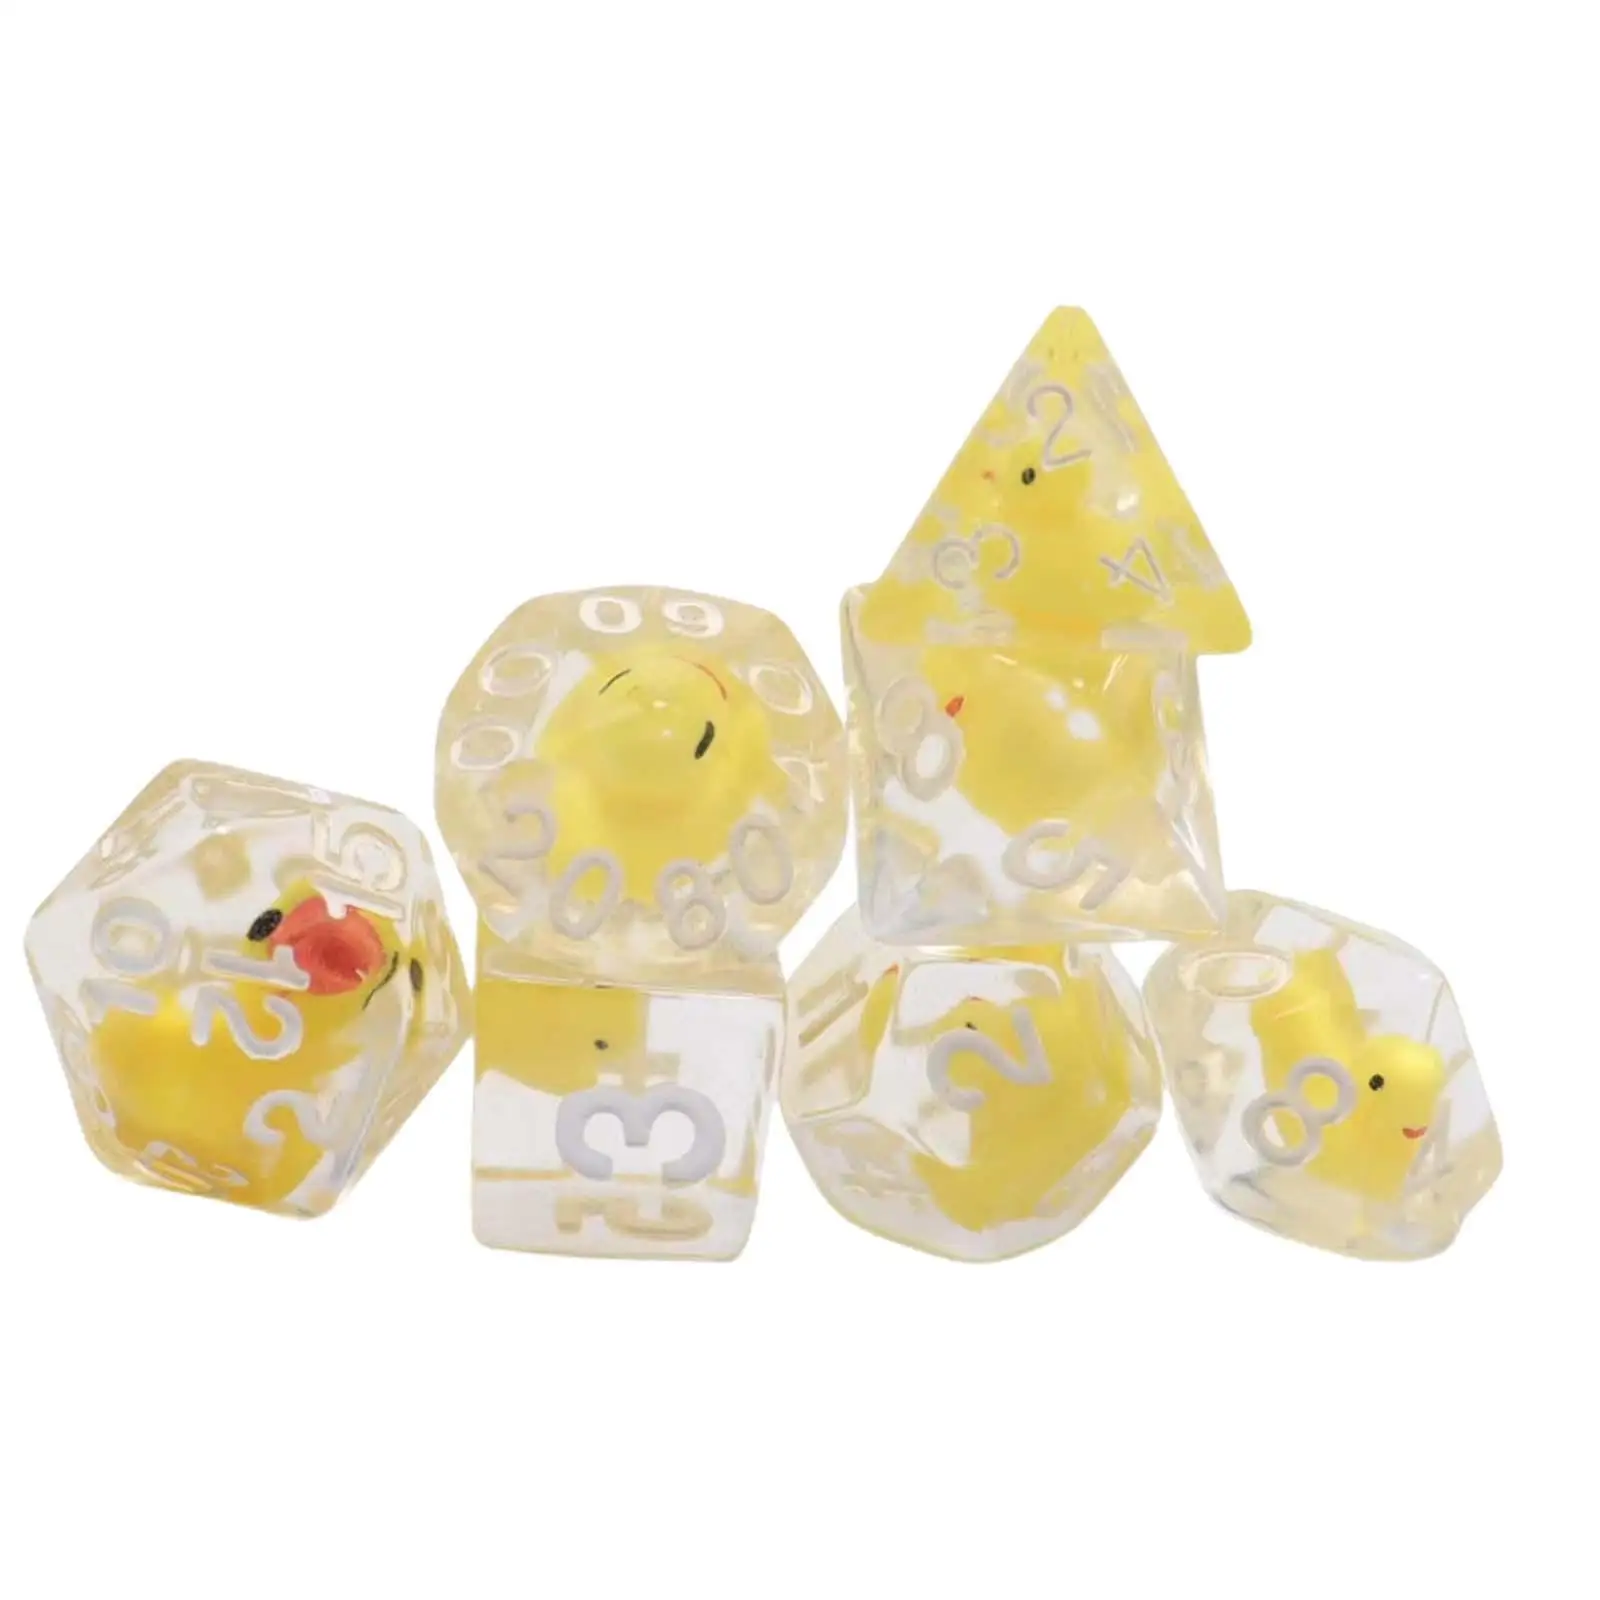 7 Pieces Multi Sided Dices D4-d20 Role Playing Game Dices Playing Dices Polyhedral Dices for Party Bar KTV Table Game Board Game